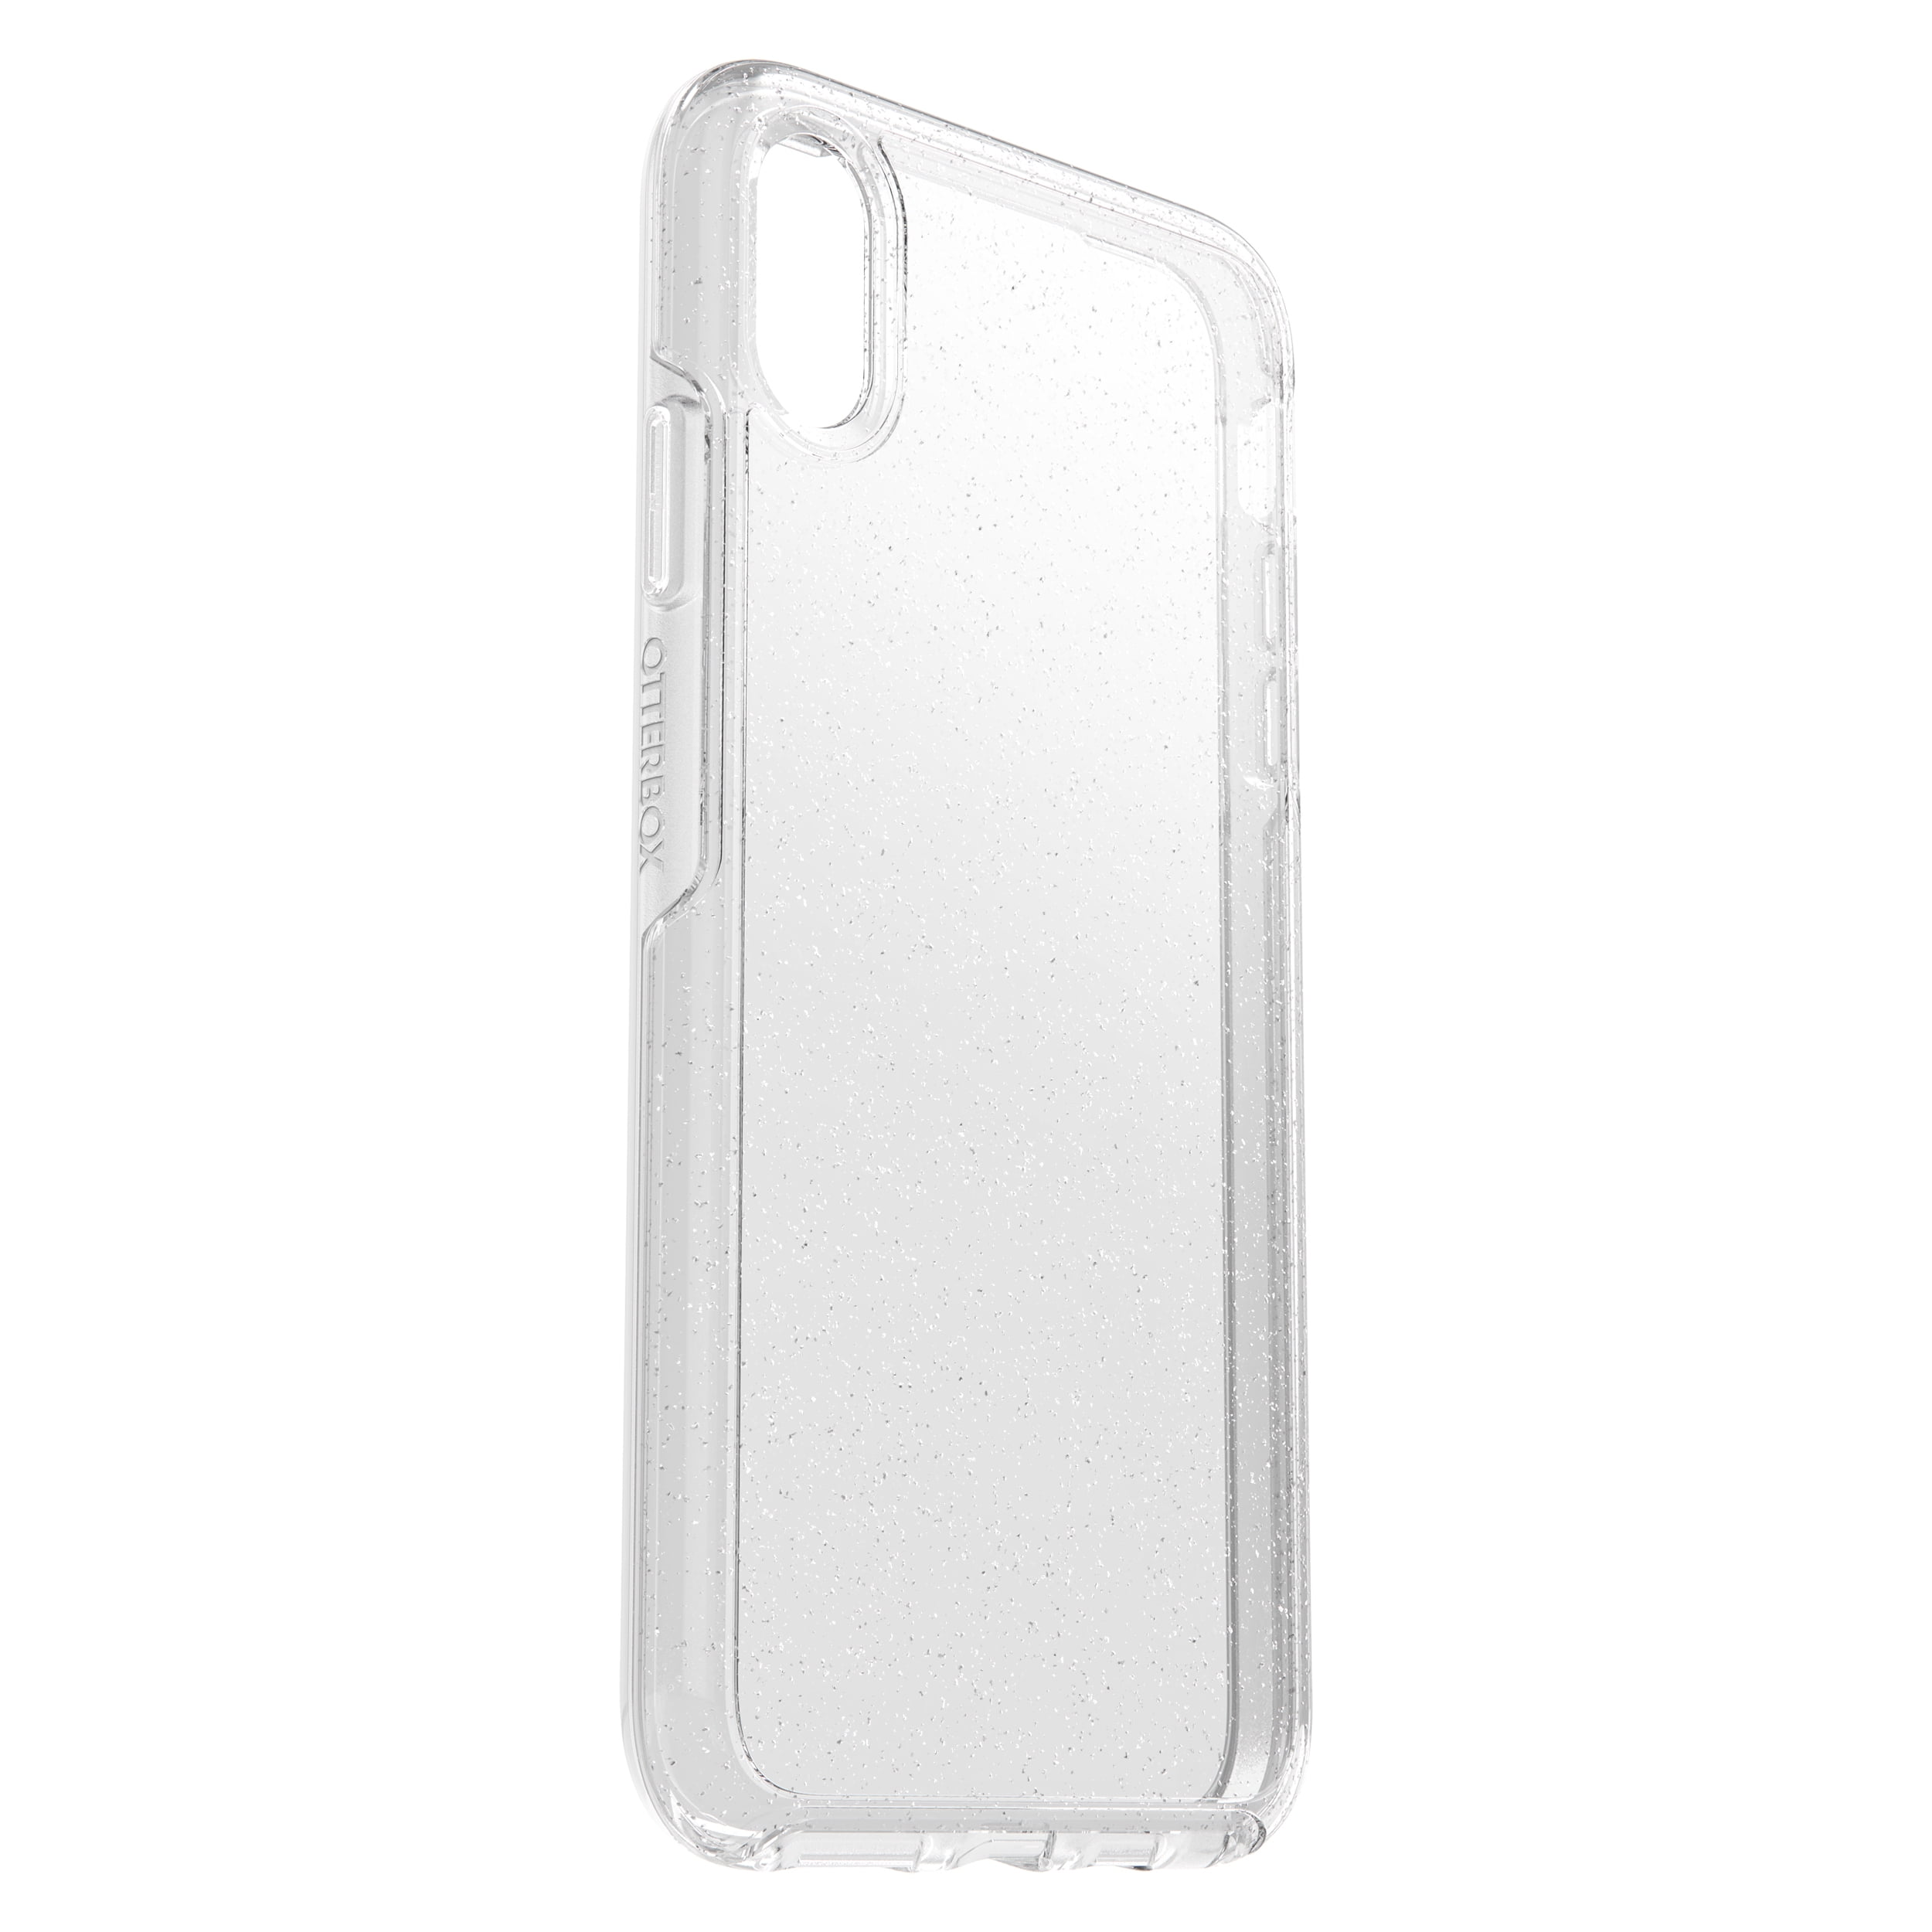 OtterBox Symmetry Series Cover for iPhone Xs Max, Clear